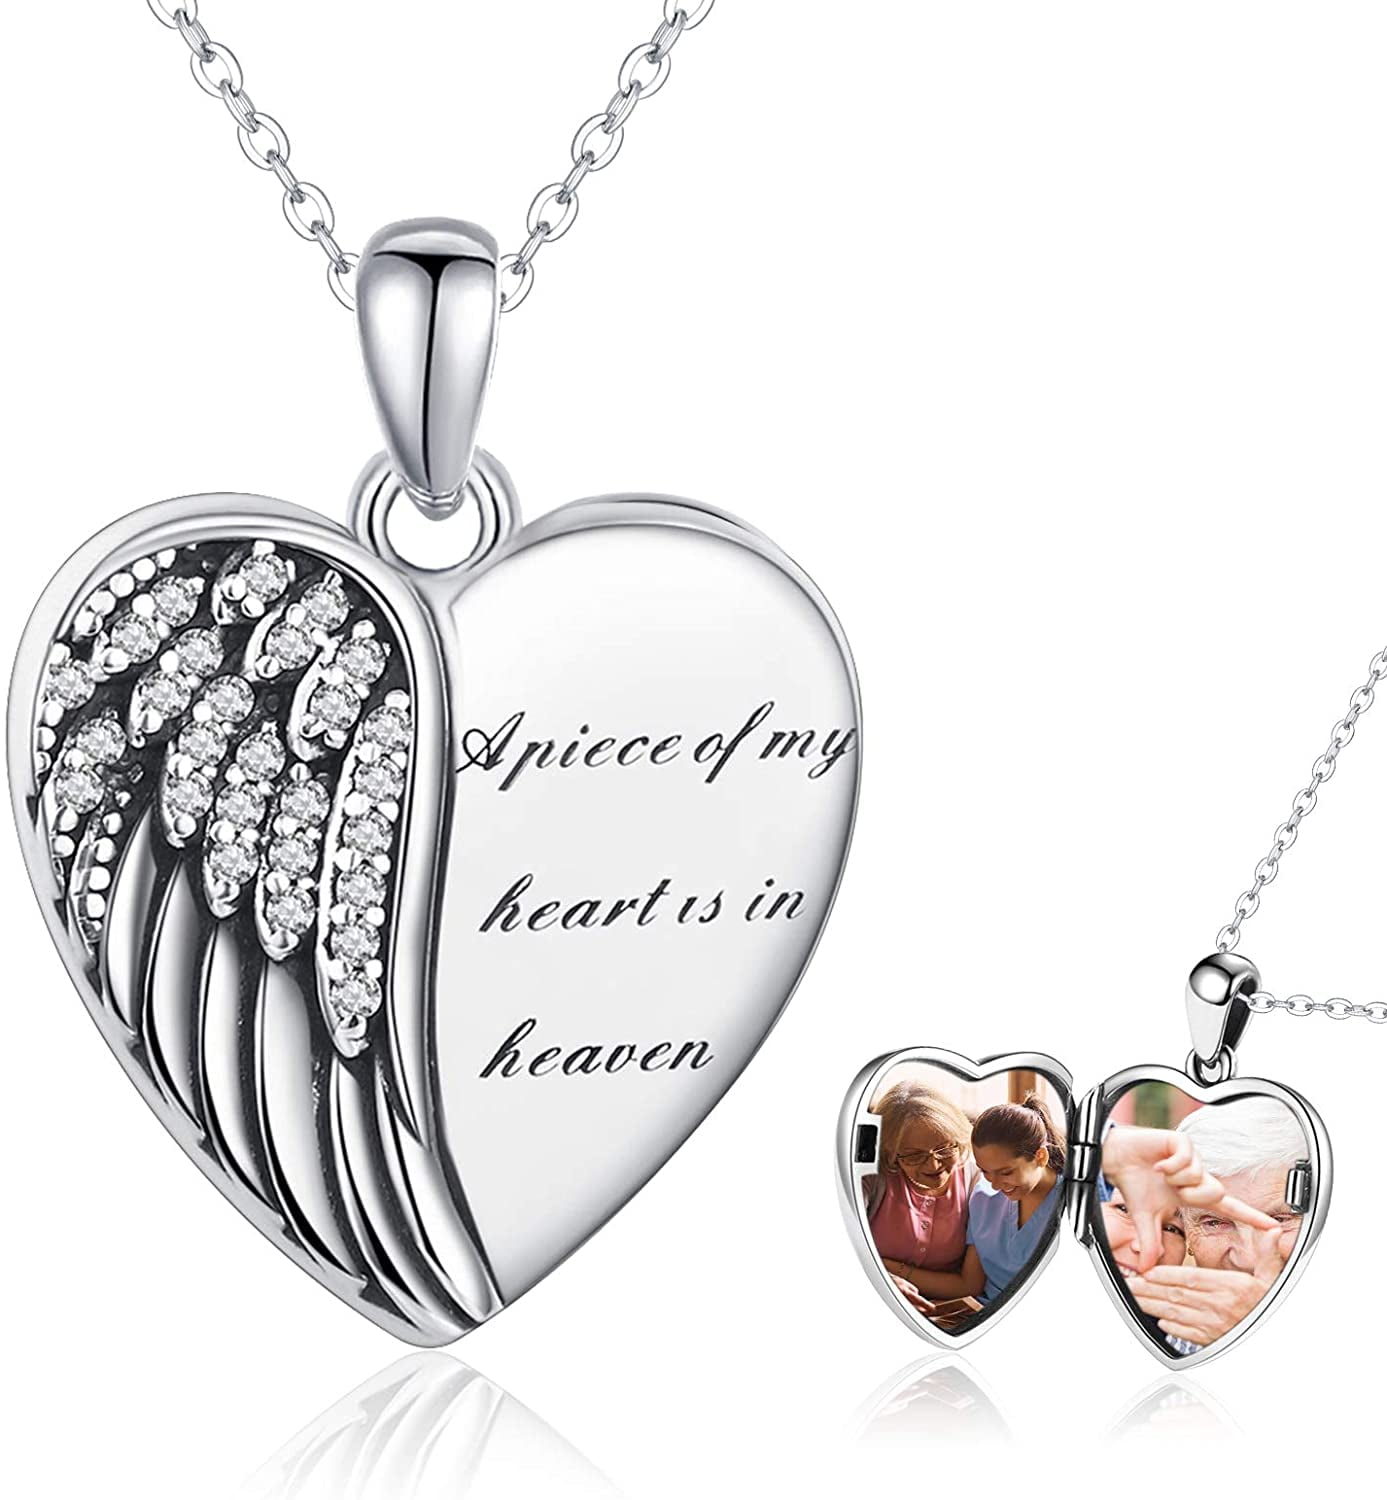 3 PCS. SILVER PLATED HEART LOCKETS WITH FLORAL DESIGN M258ds 